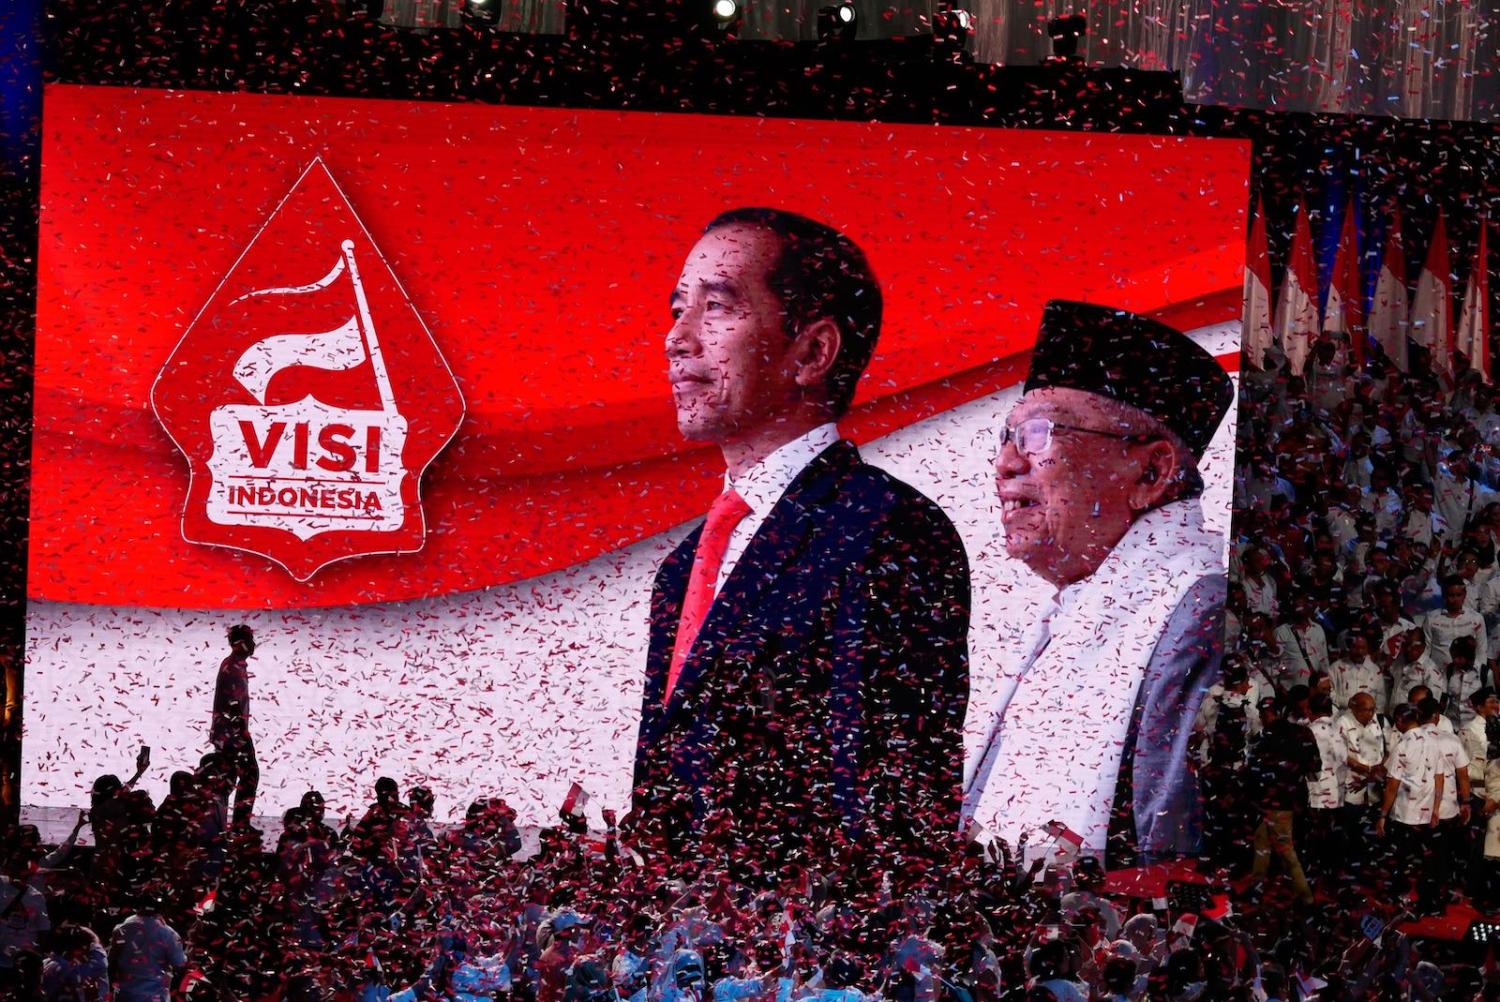 Preparations earlier this month for Jokowi to deliver a presidential vision and mission following his recent election victory (Photo: Anton Raharjo via Getty)